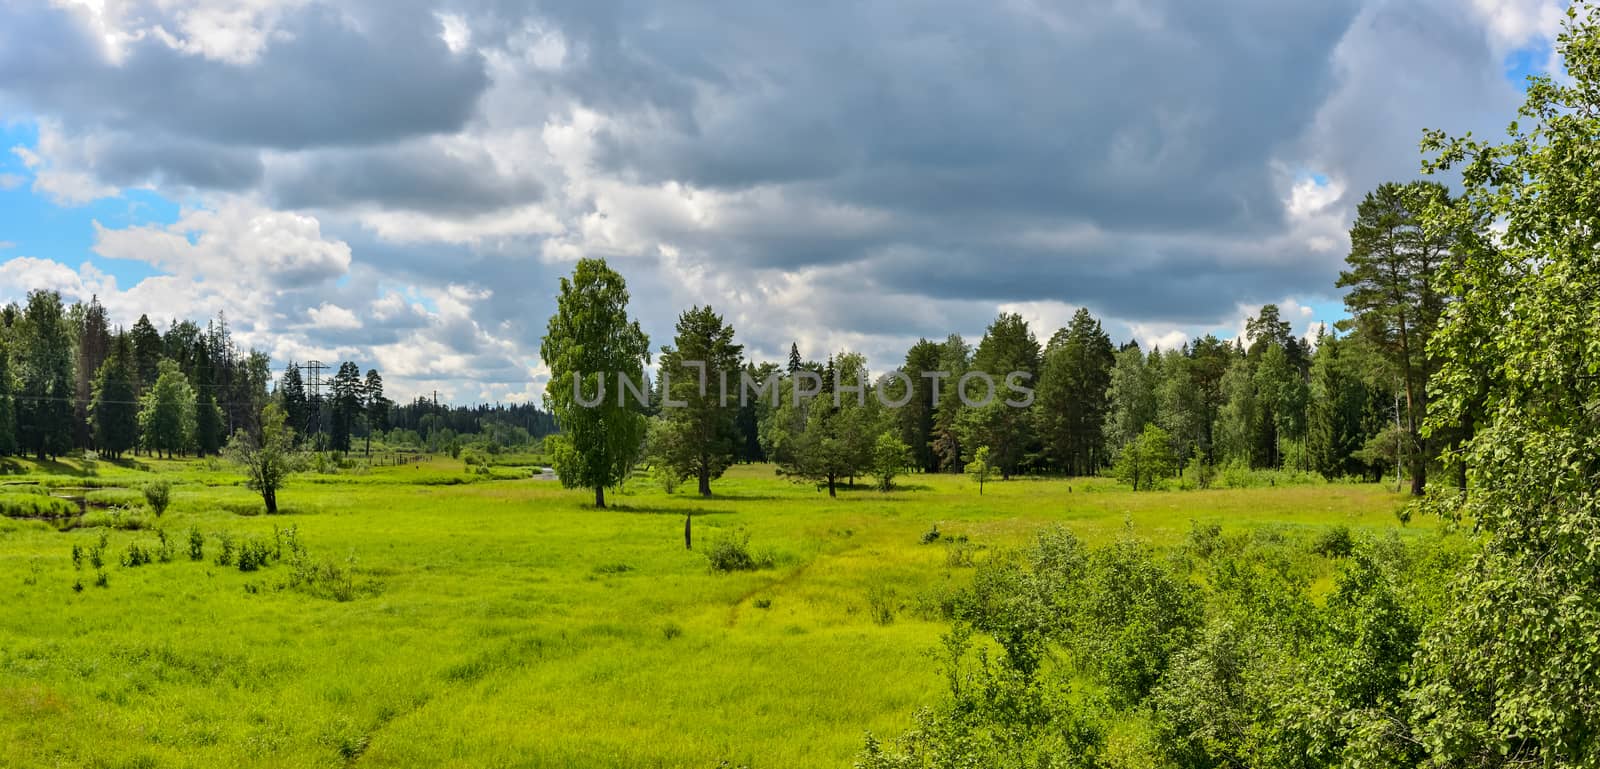 A flood meadow overgrown with trees and bushes under dark clouds in the blue sky.